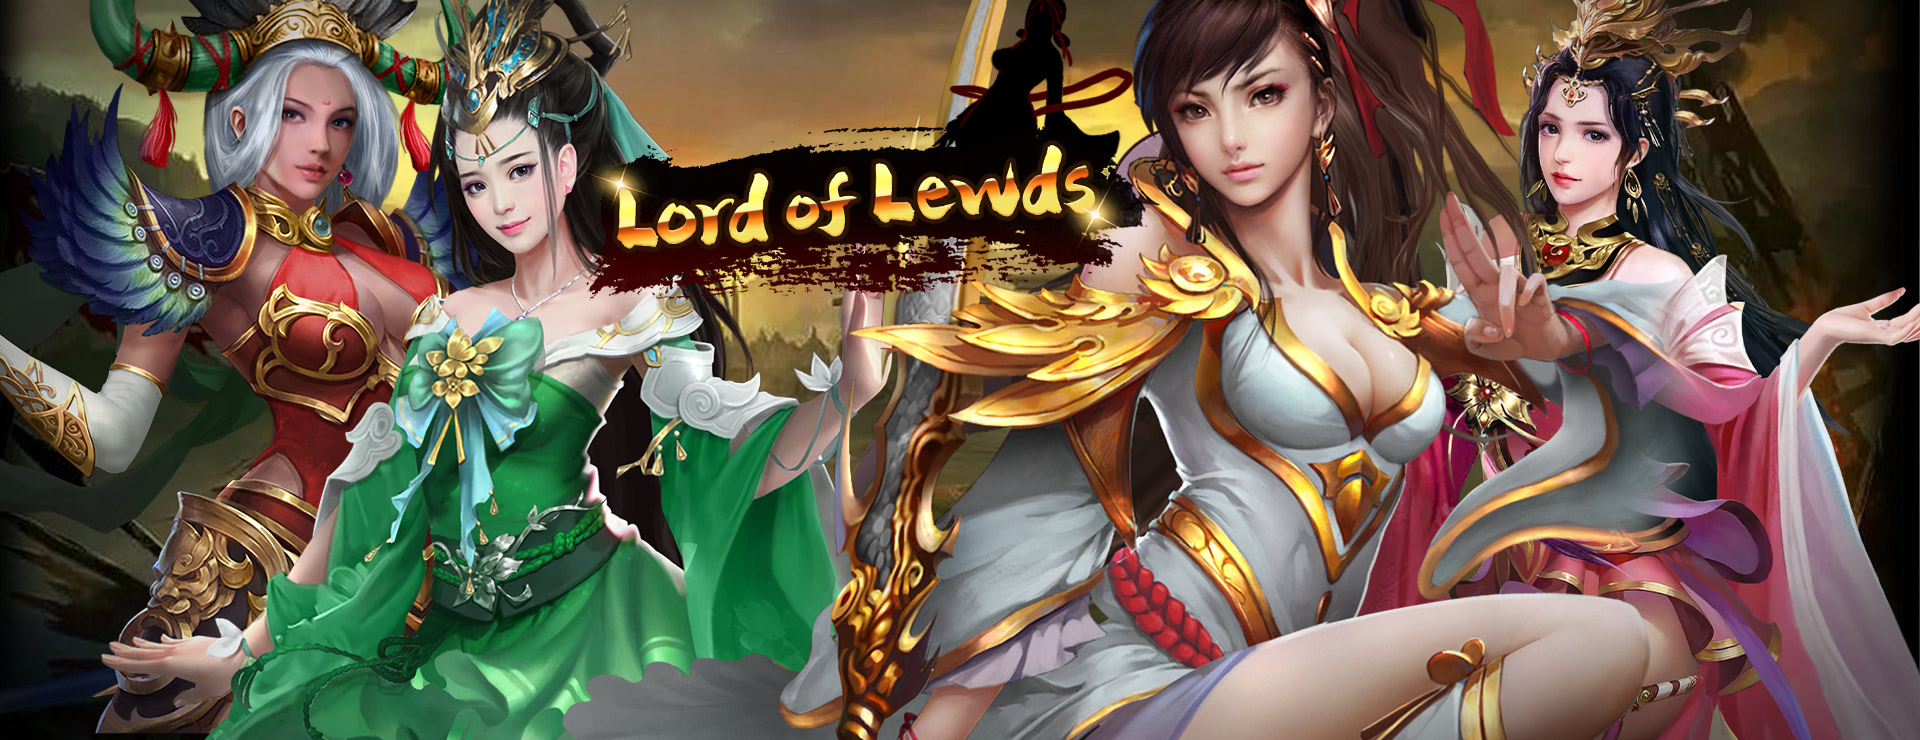 Lord of Lewds Game - 計画 ゲーム